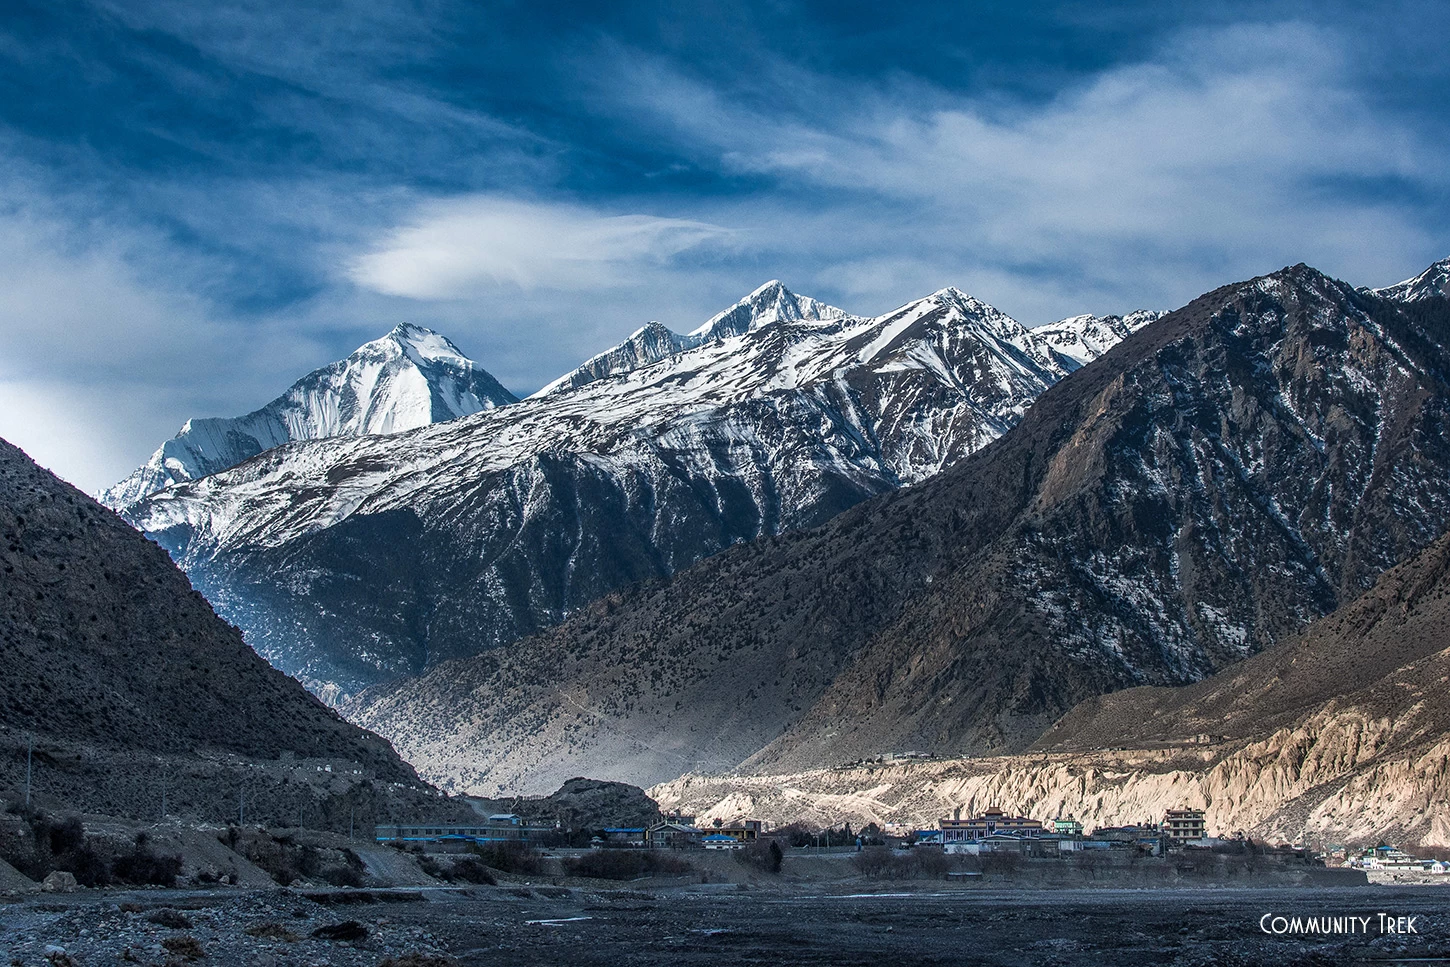 Travelling Upper Mustang in Winter: A Guide for Travelers